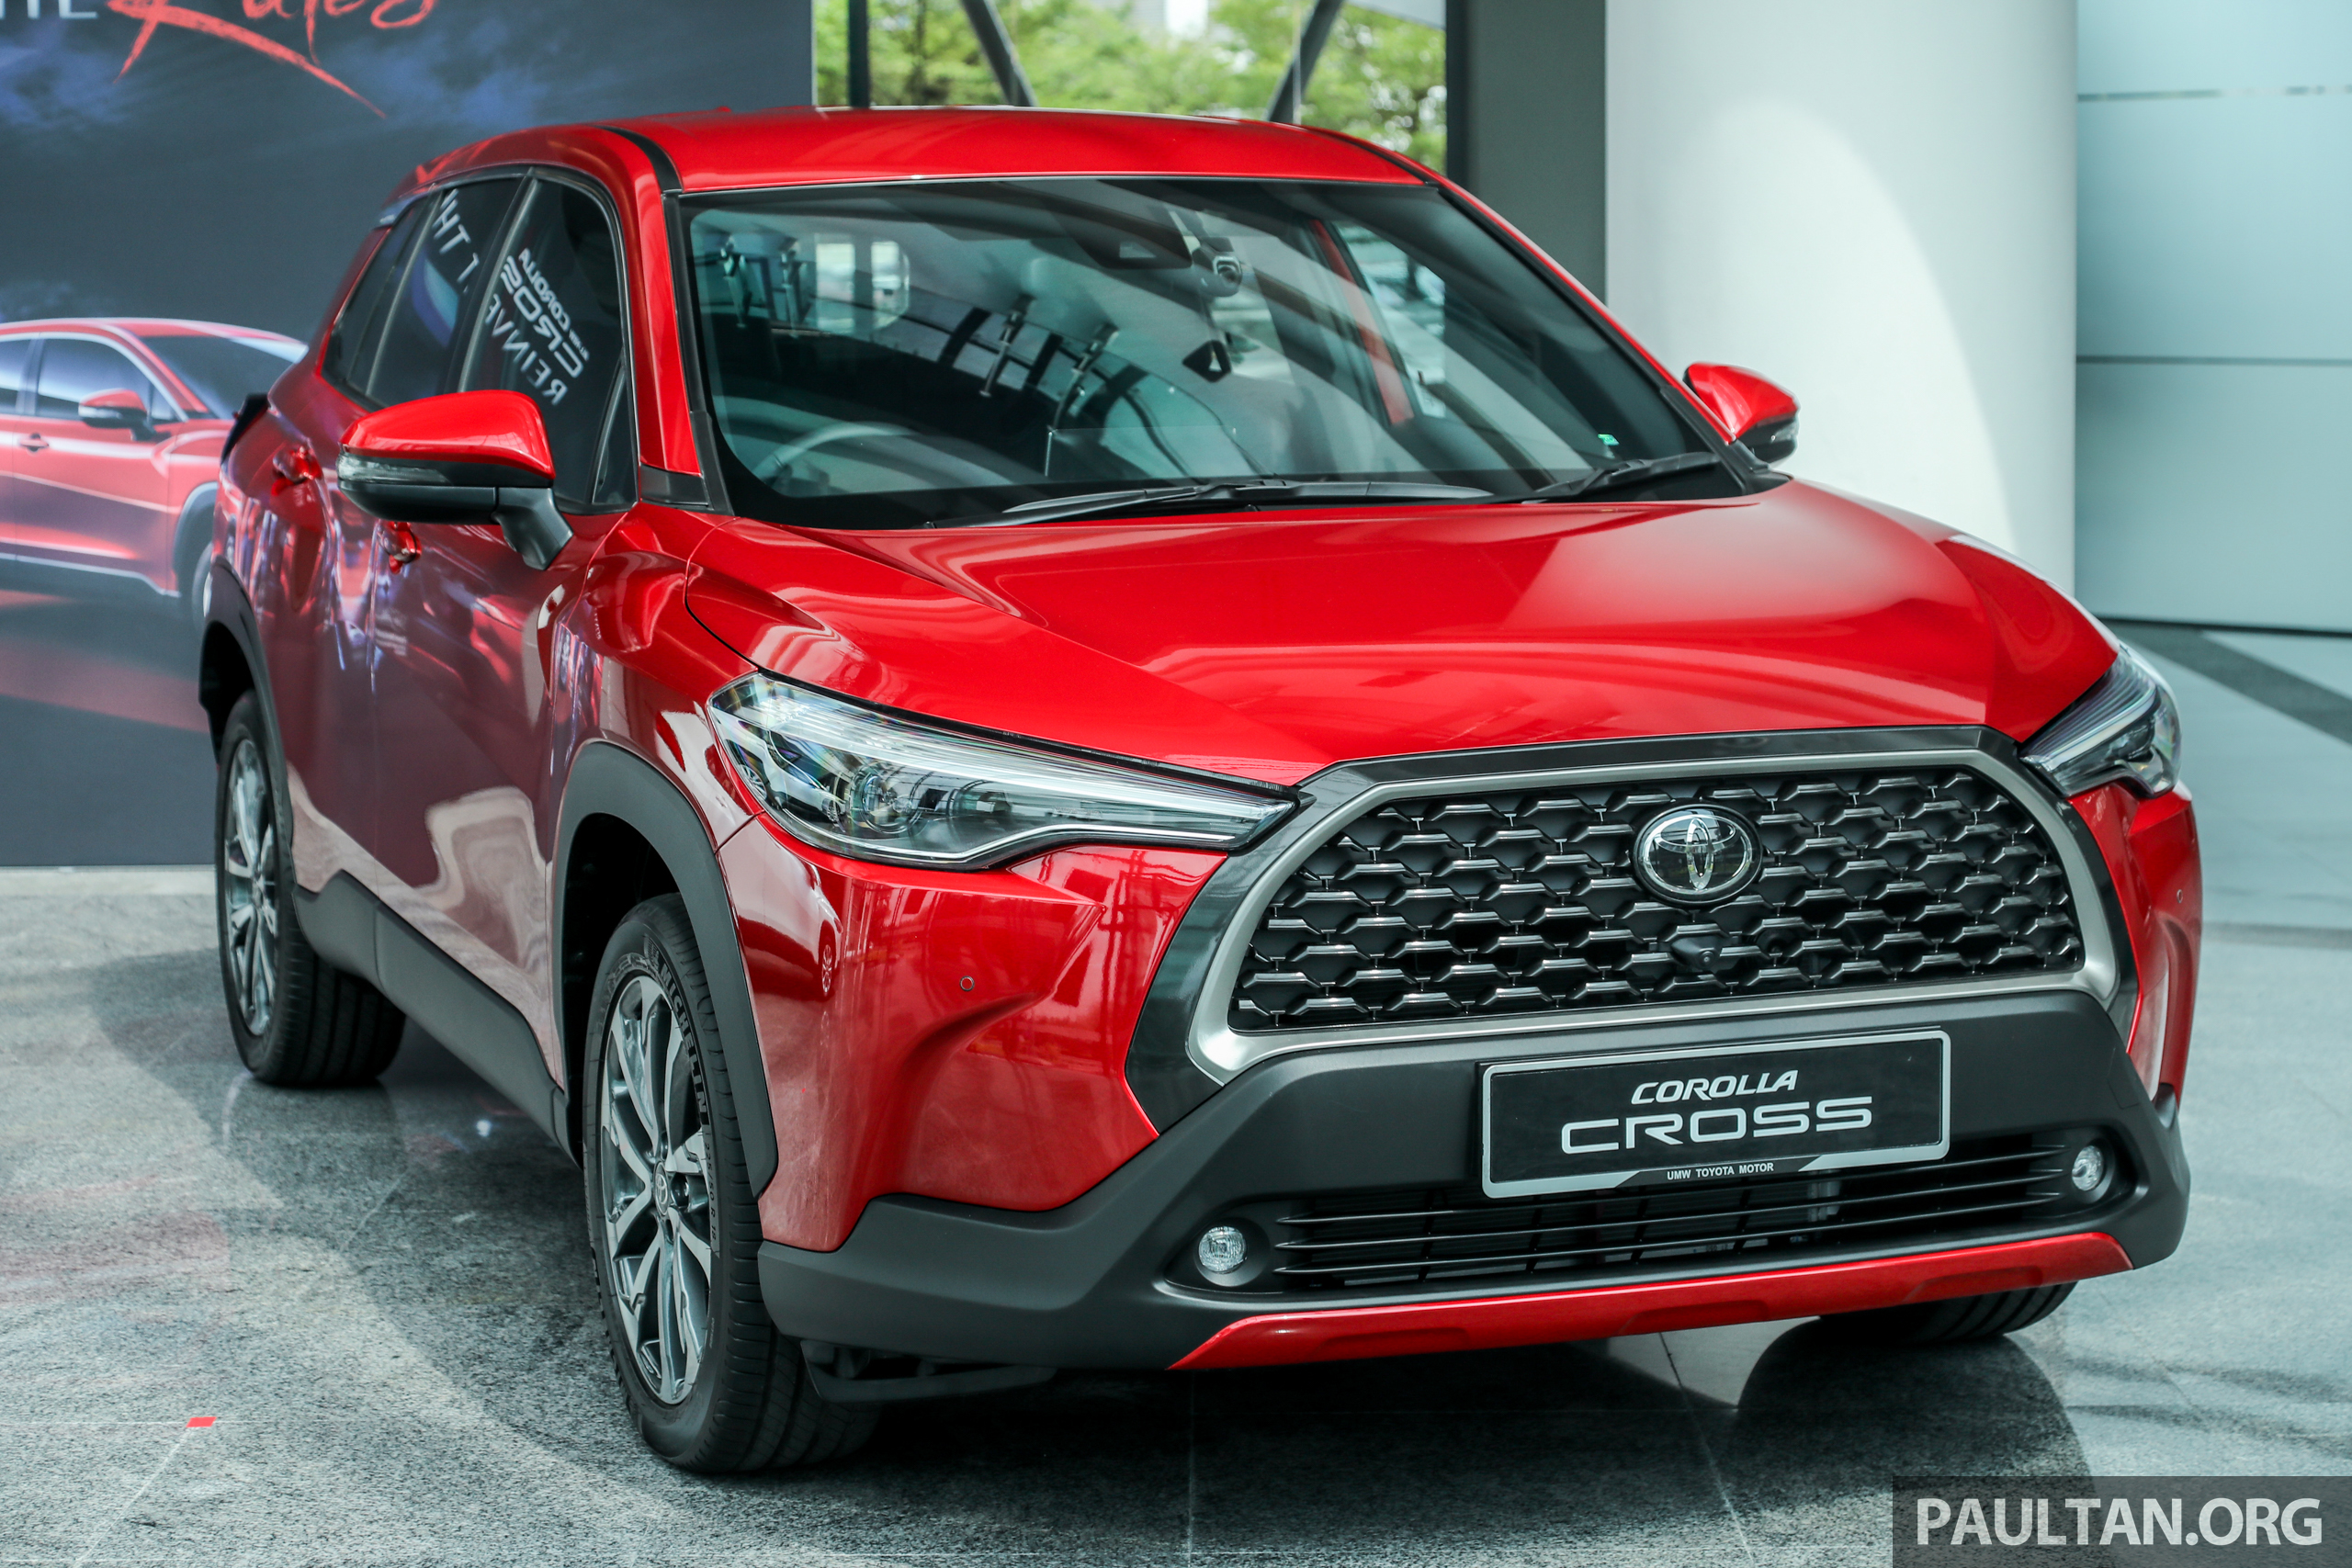 2021 Toyota Corolla Cross is a new affordable SUV likely headed to